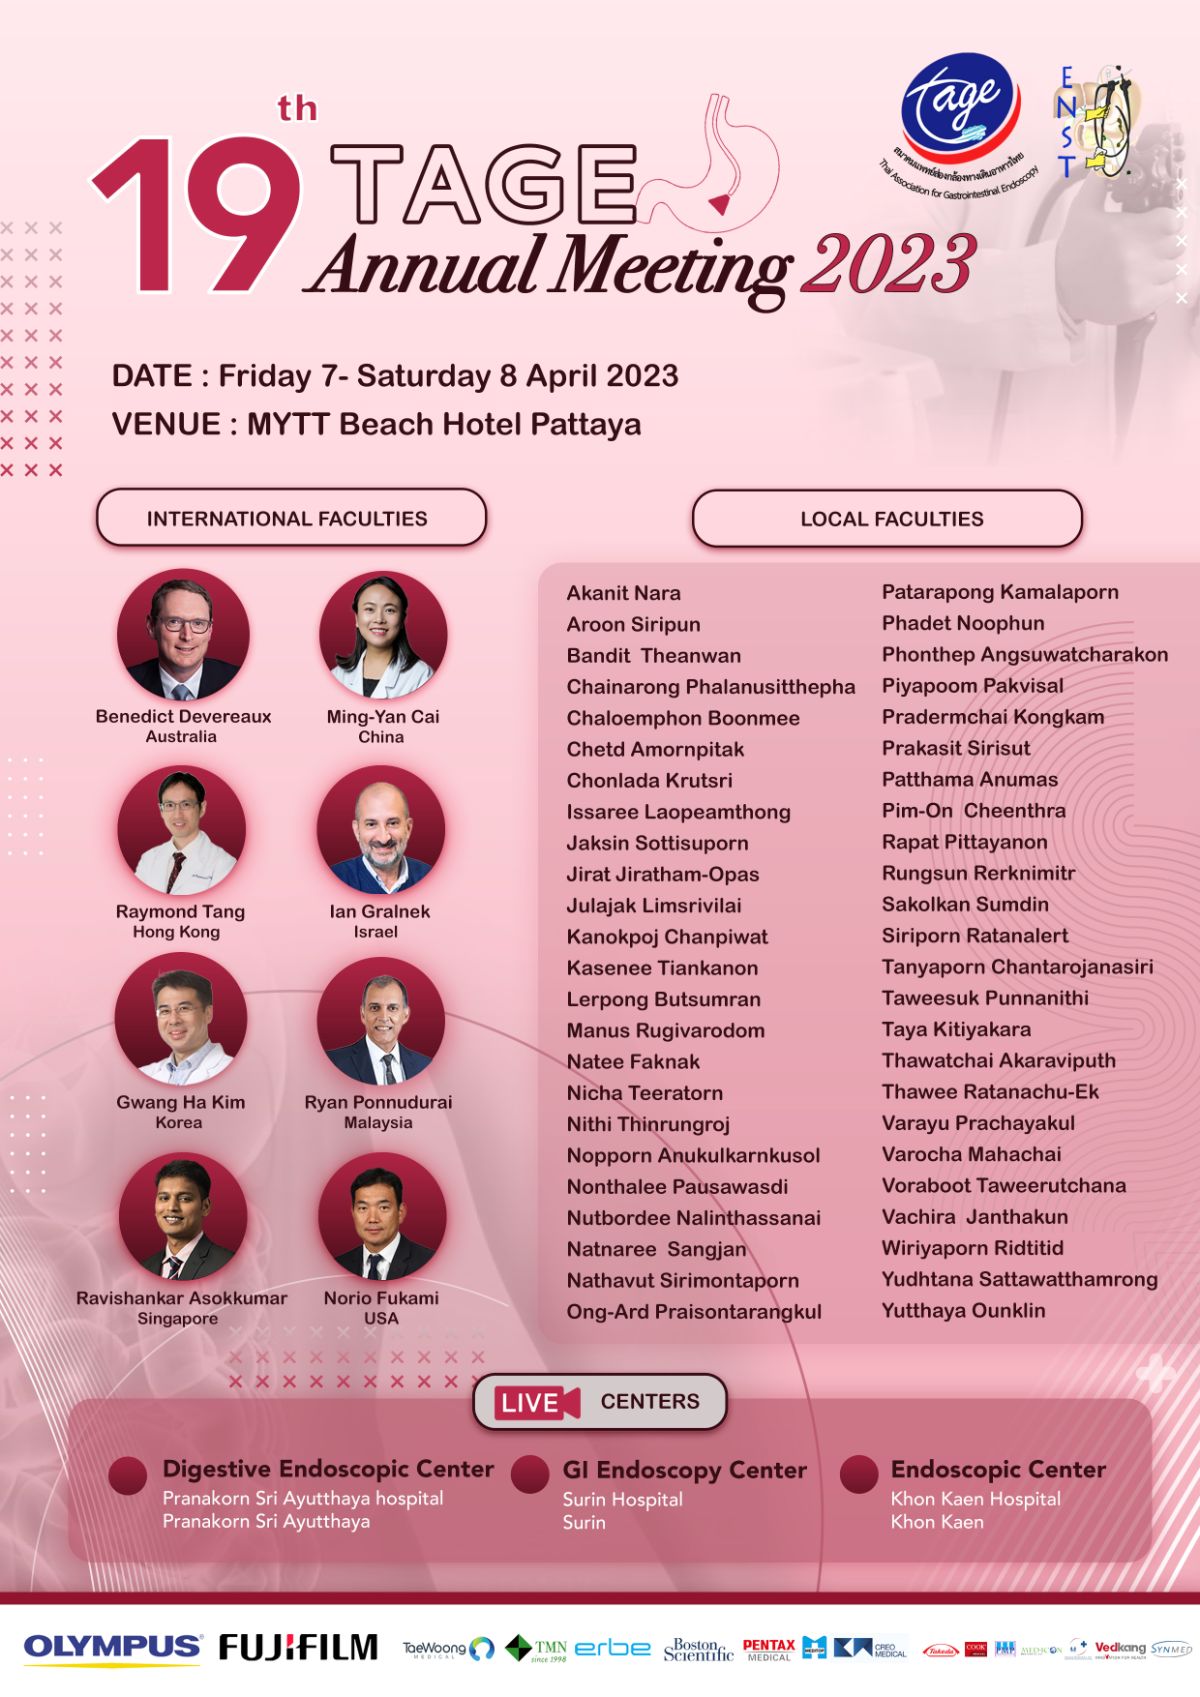 Annual Meeting TAGE 2023